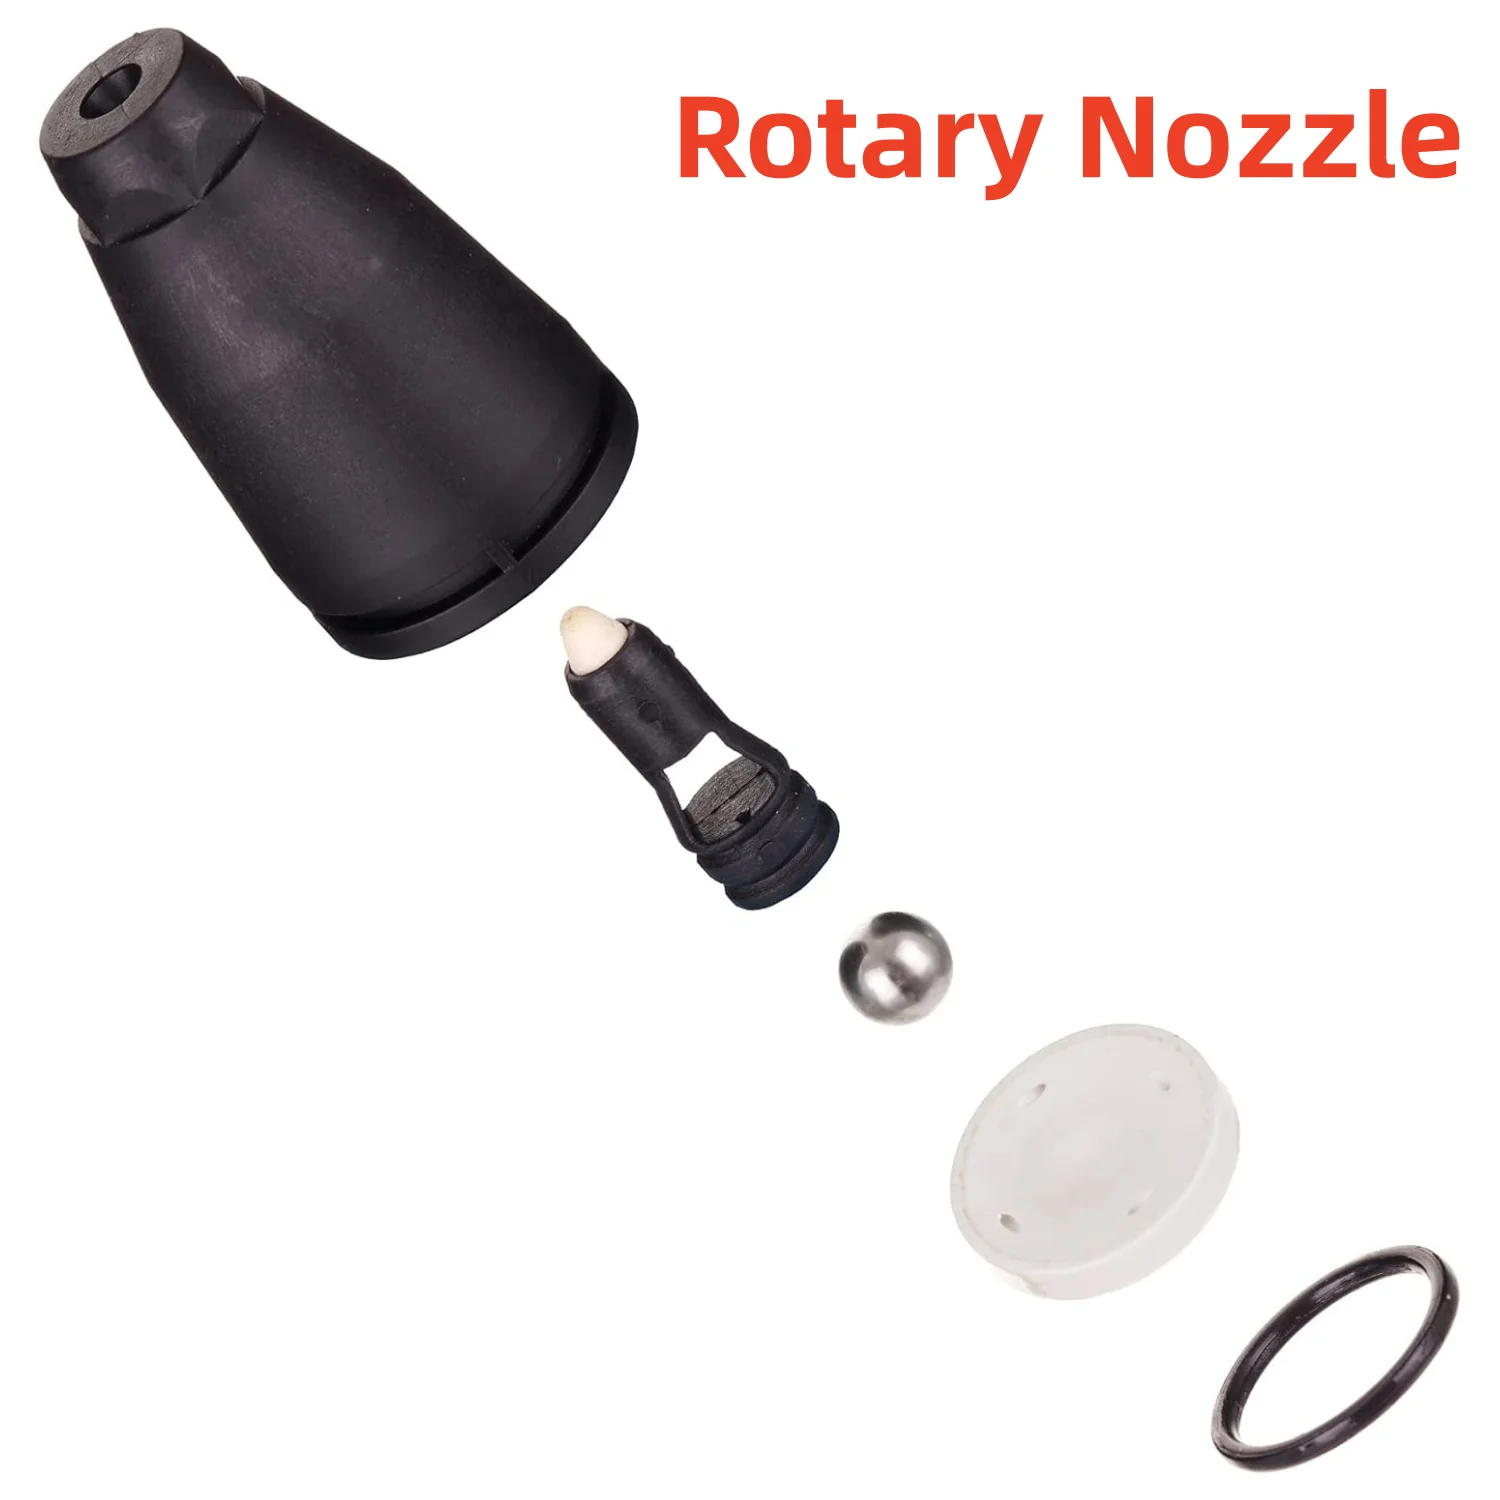 Dirt Blaster Rotary Nozzle For High pressure Spray Lance With Repair kits for KARCHER K2-K5 Car washer